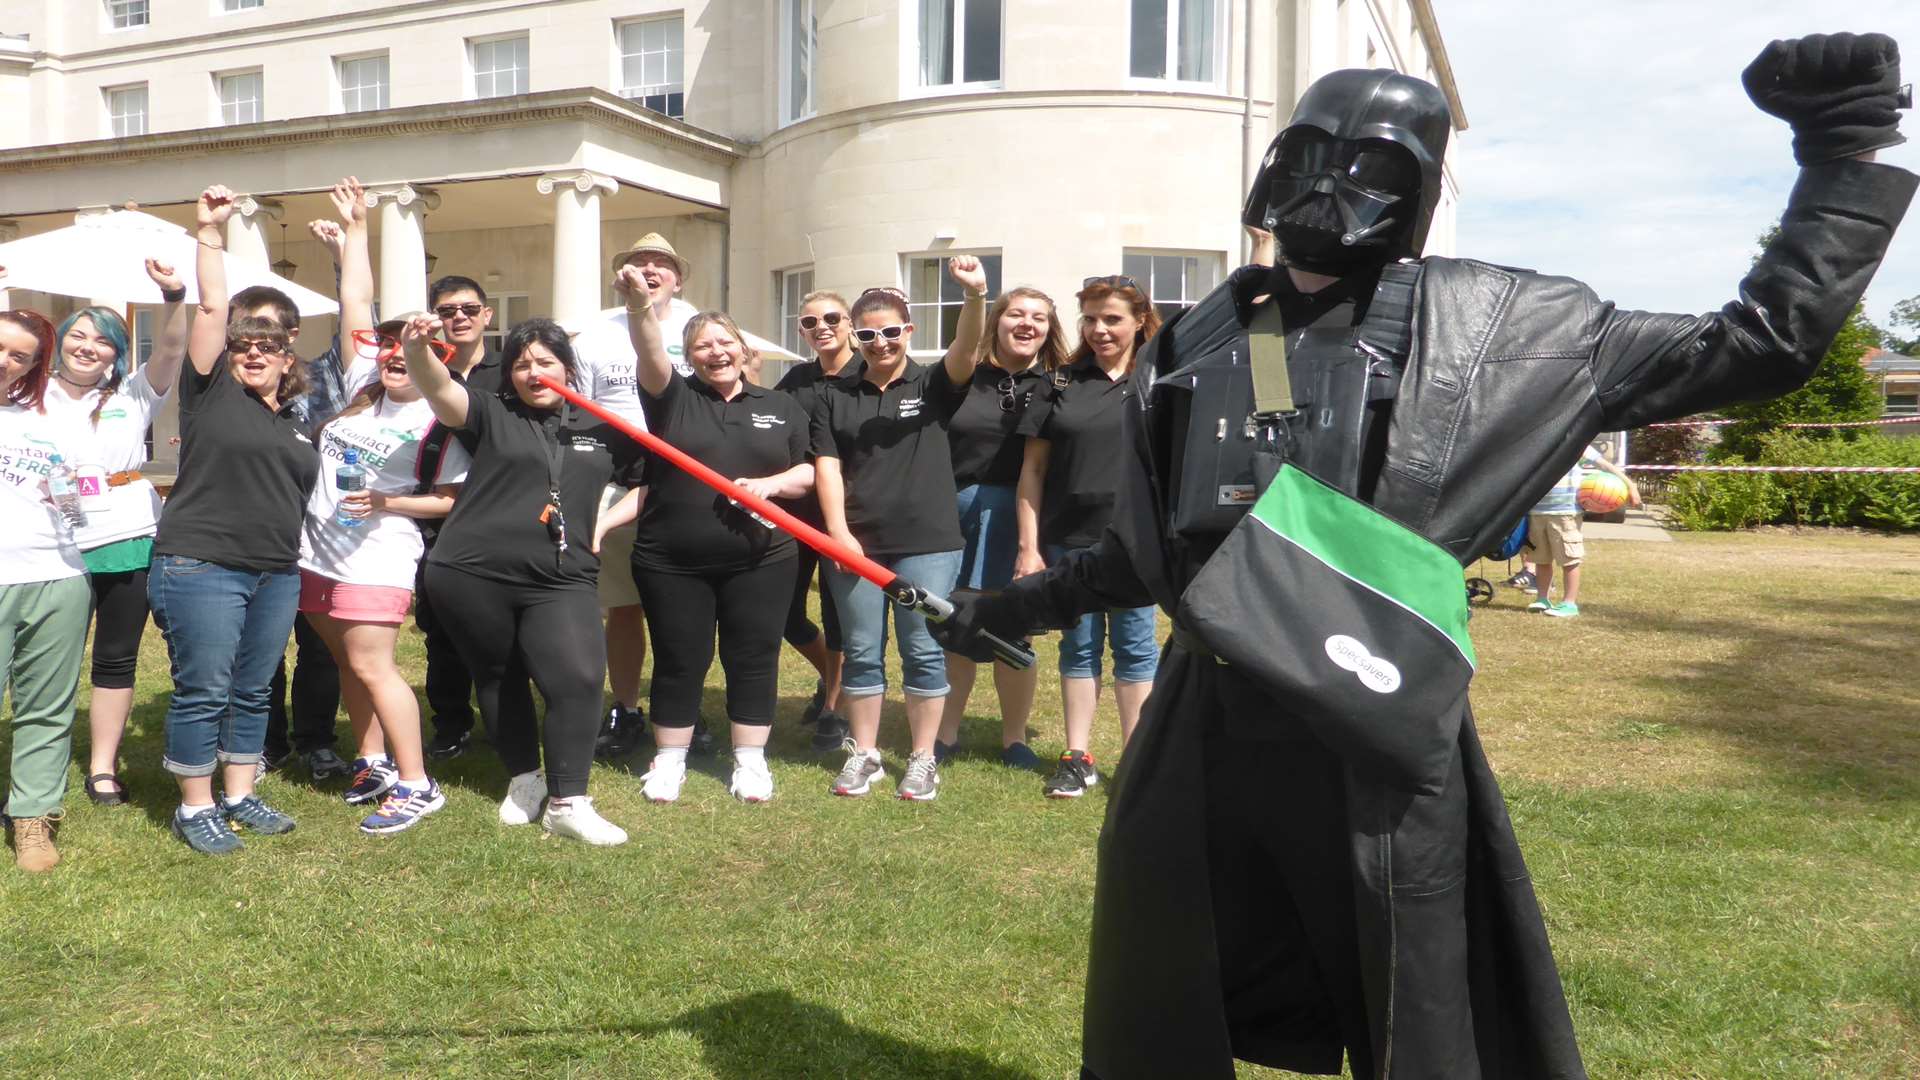 Darth Vader and his Stormtroopers taking on the 2015 KM Charity Walk. Booking is now open for the 21st anniversary event.